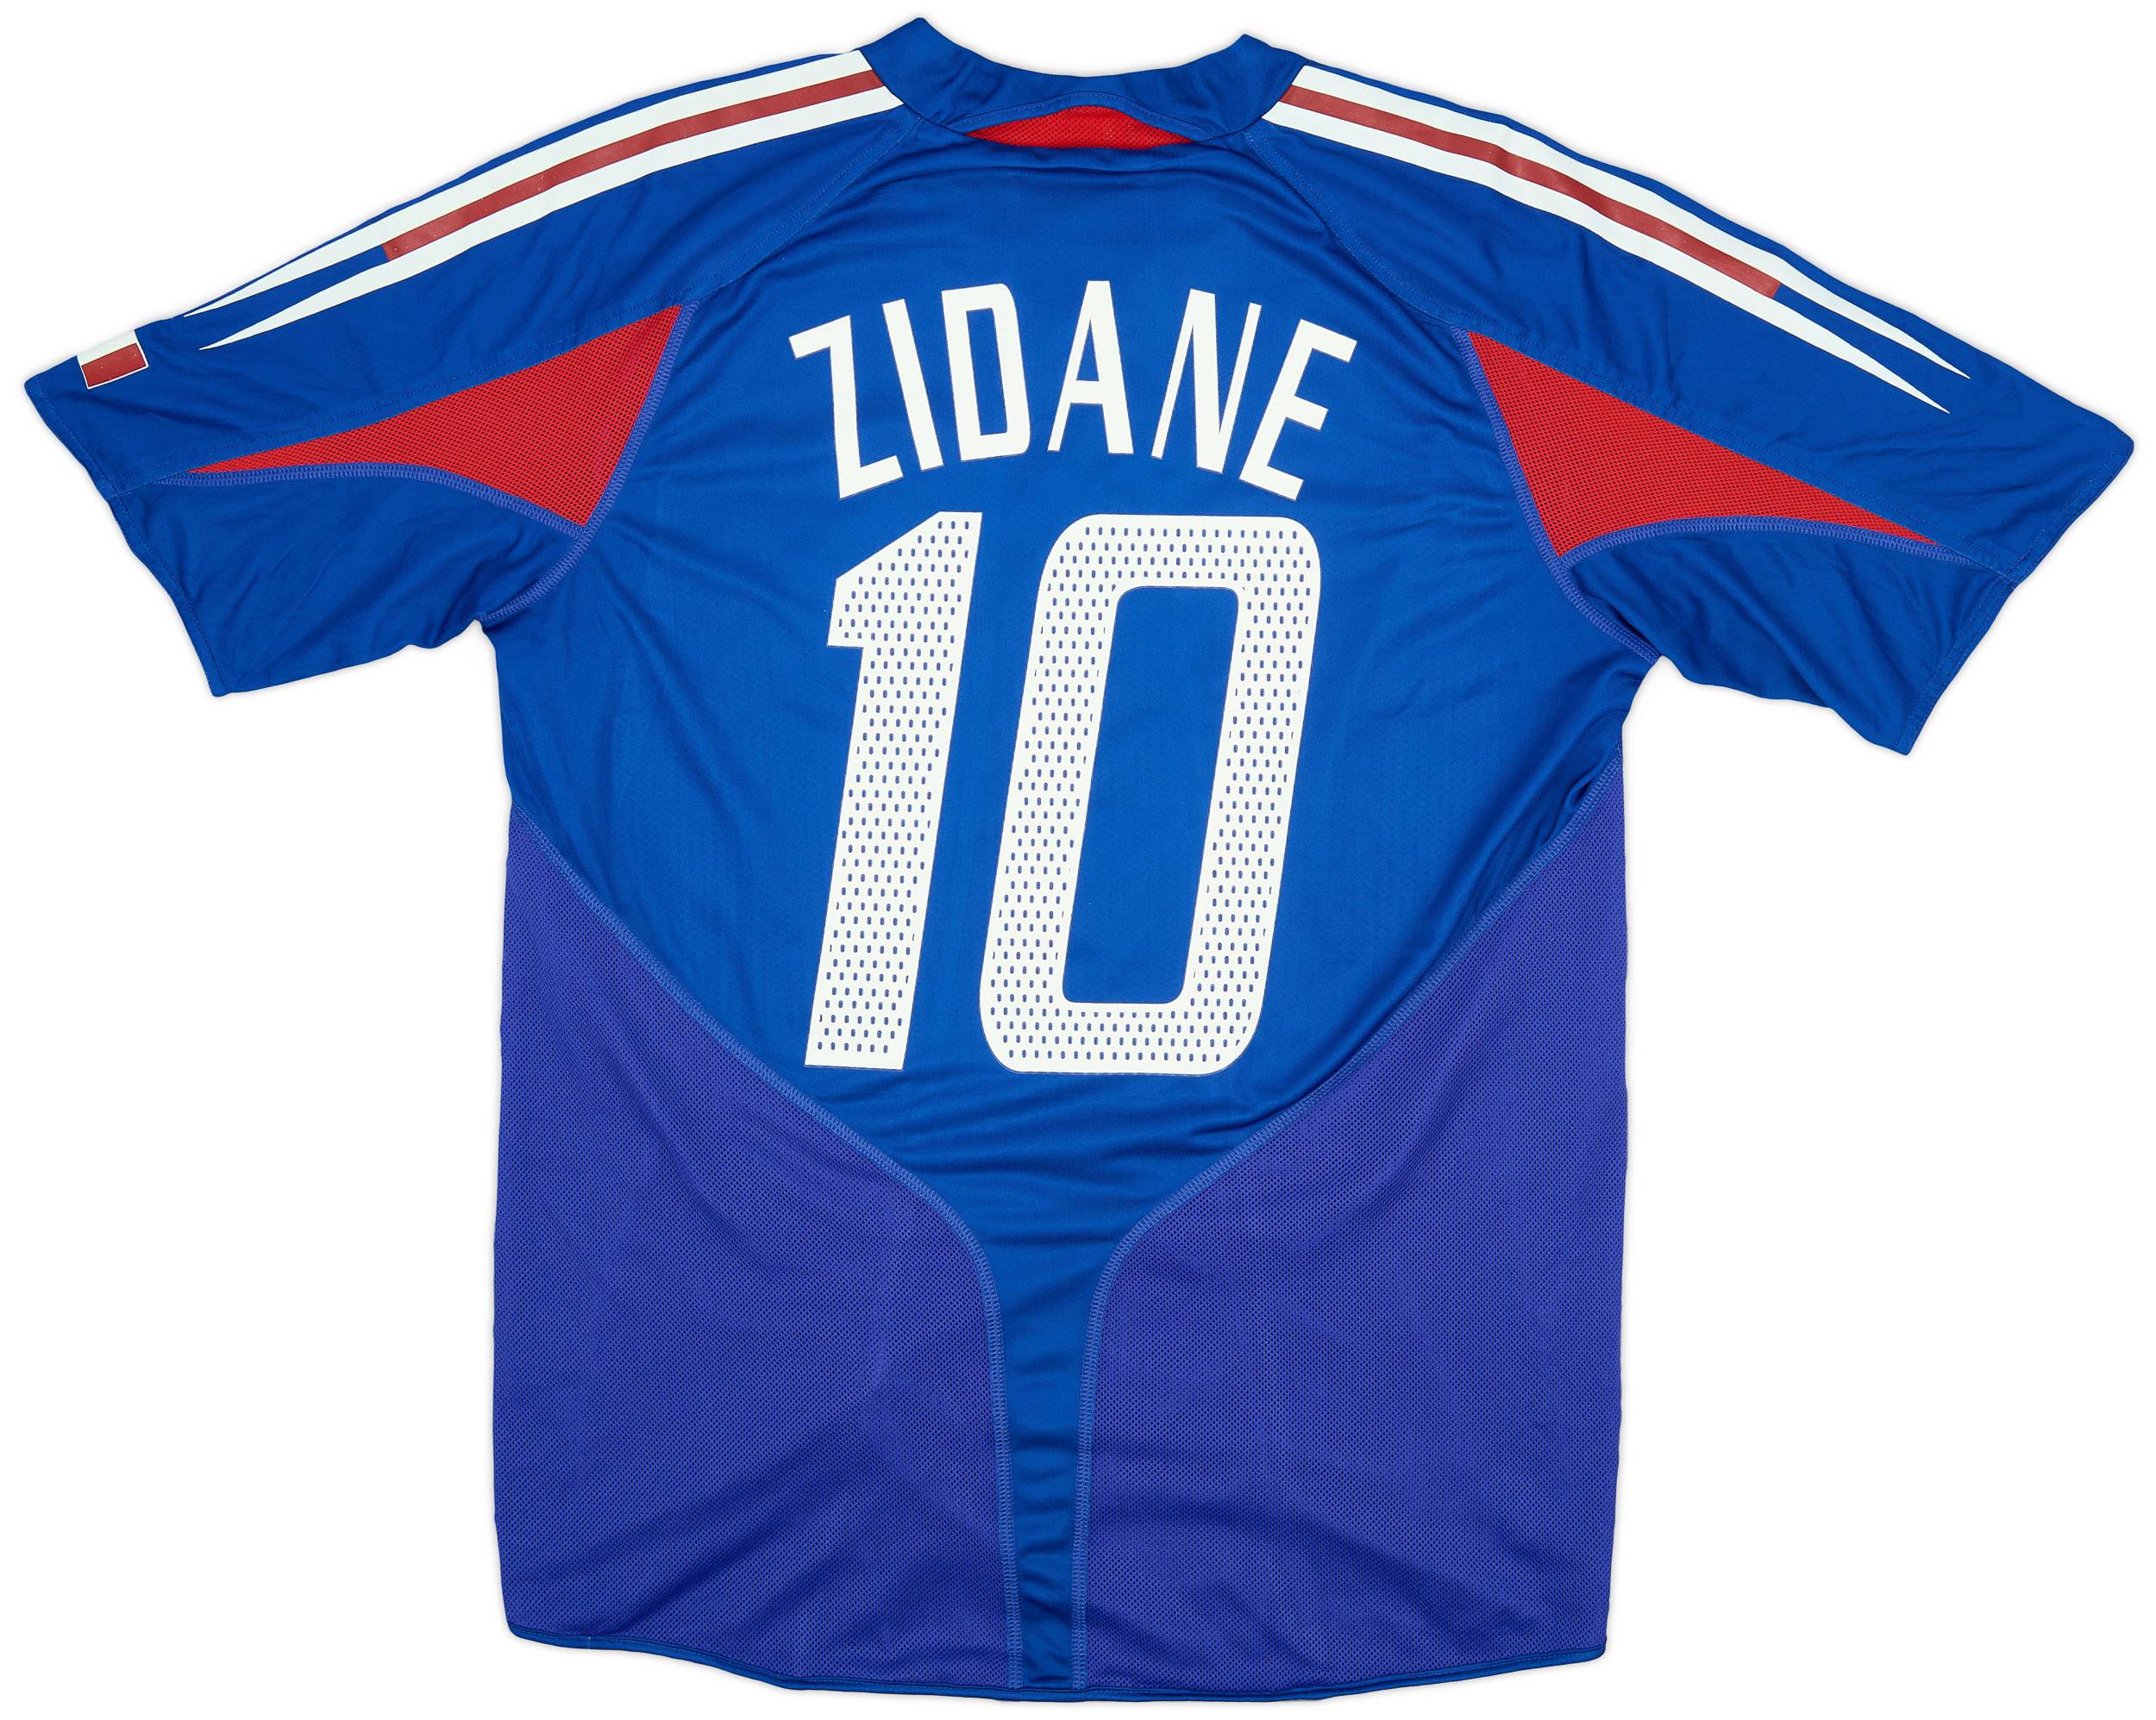 2004-06 France Player Issue Home Shirt Zidane #10 - 8/10 - (L)